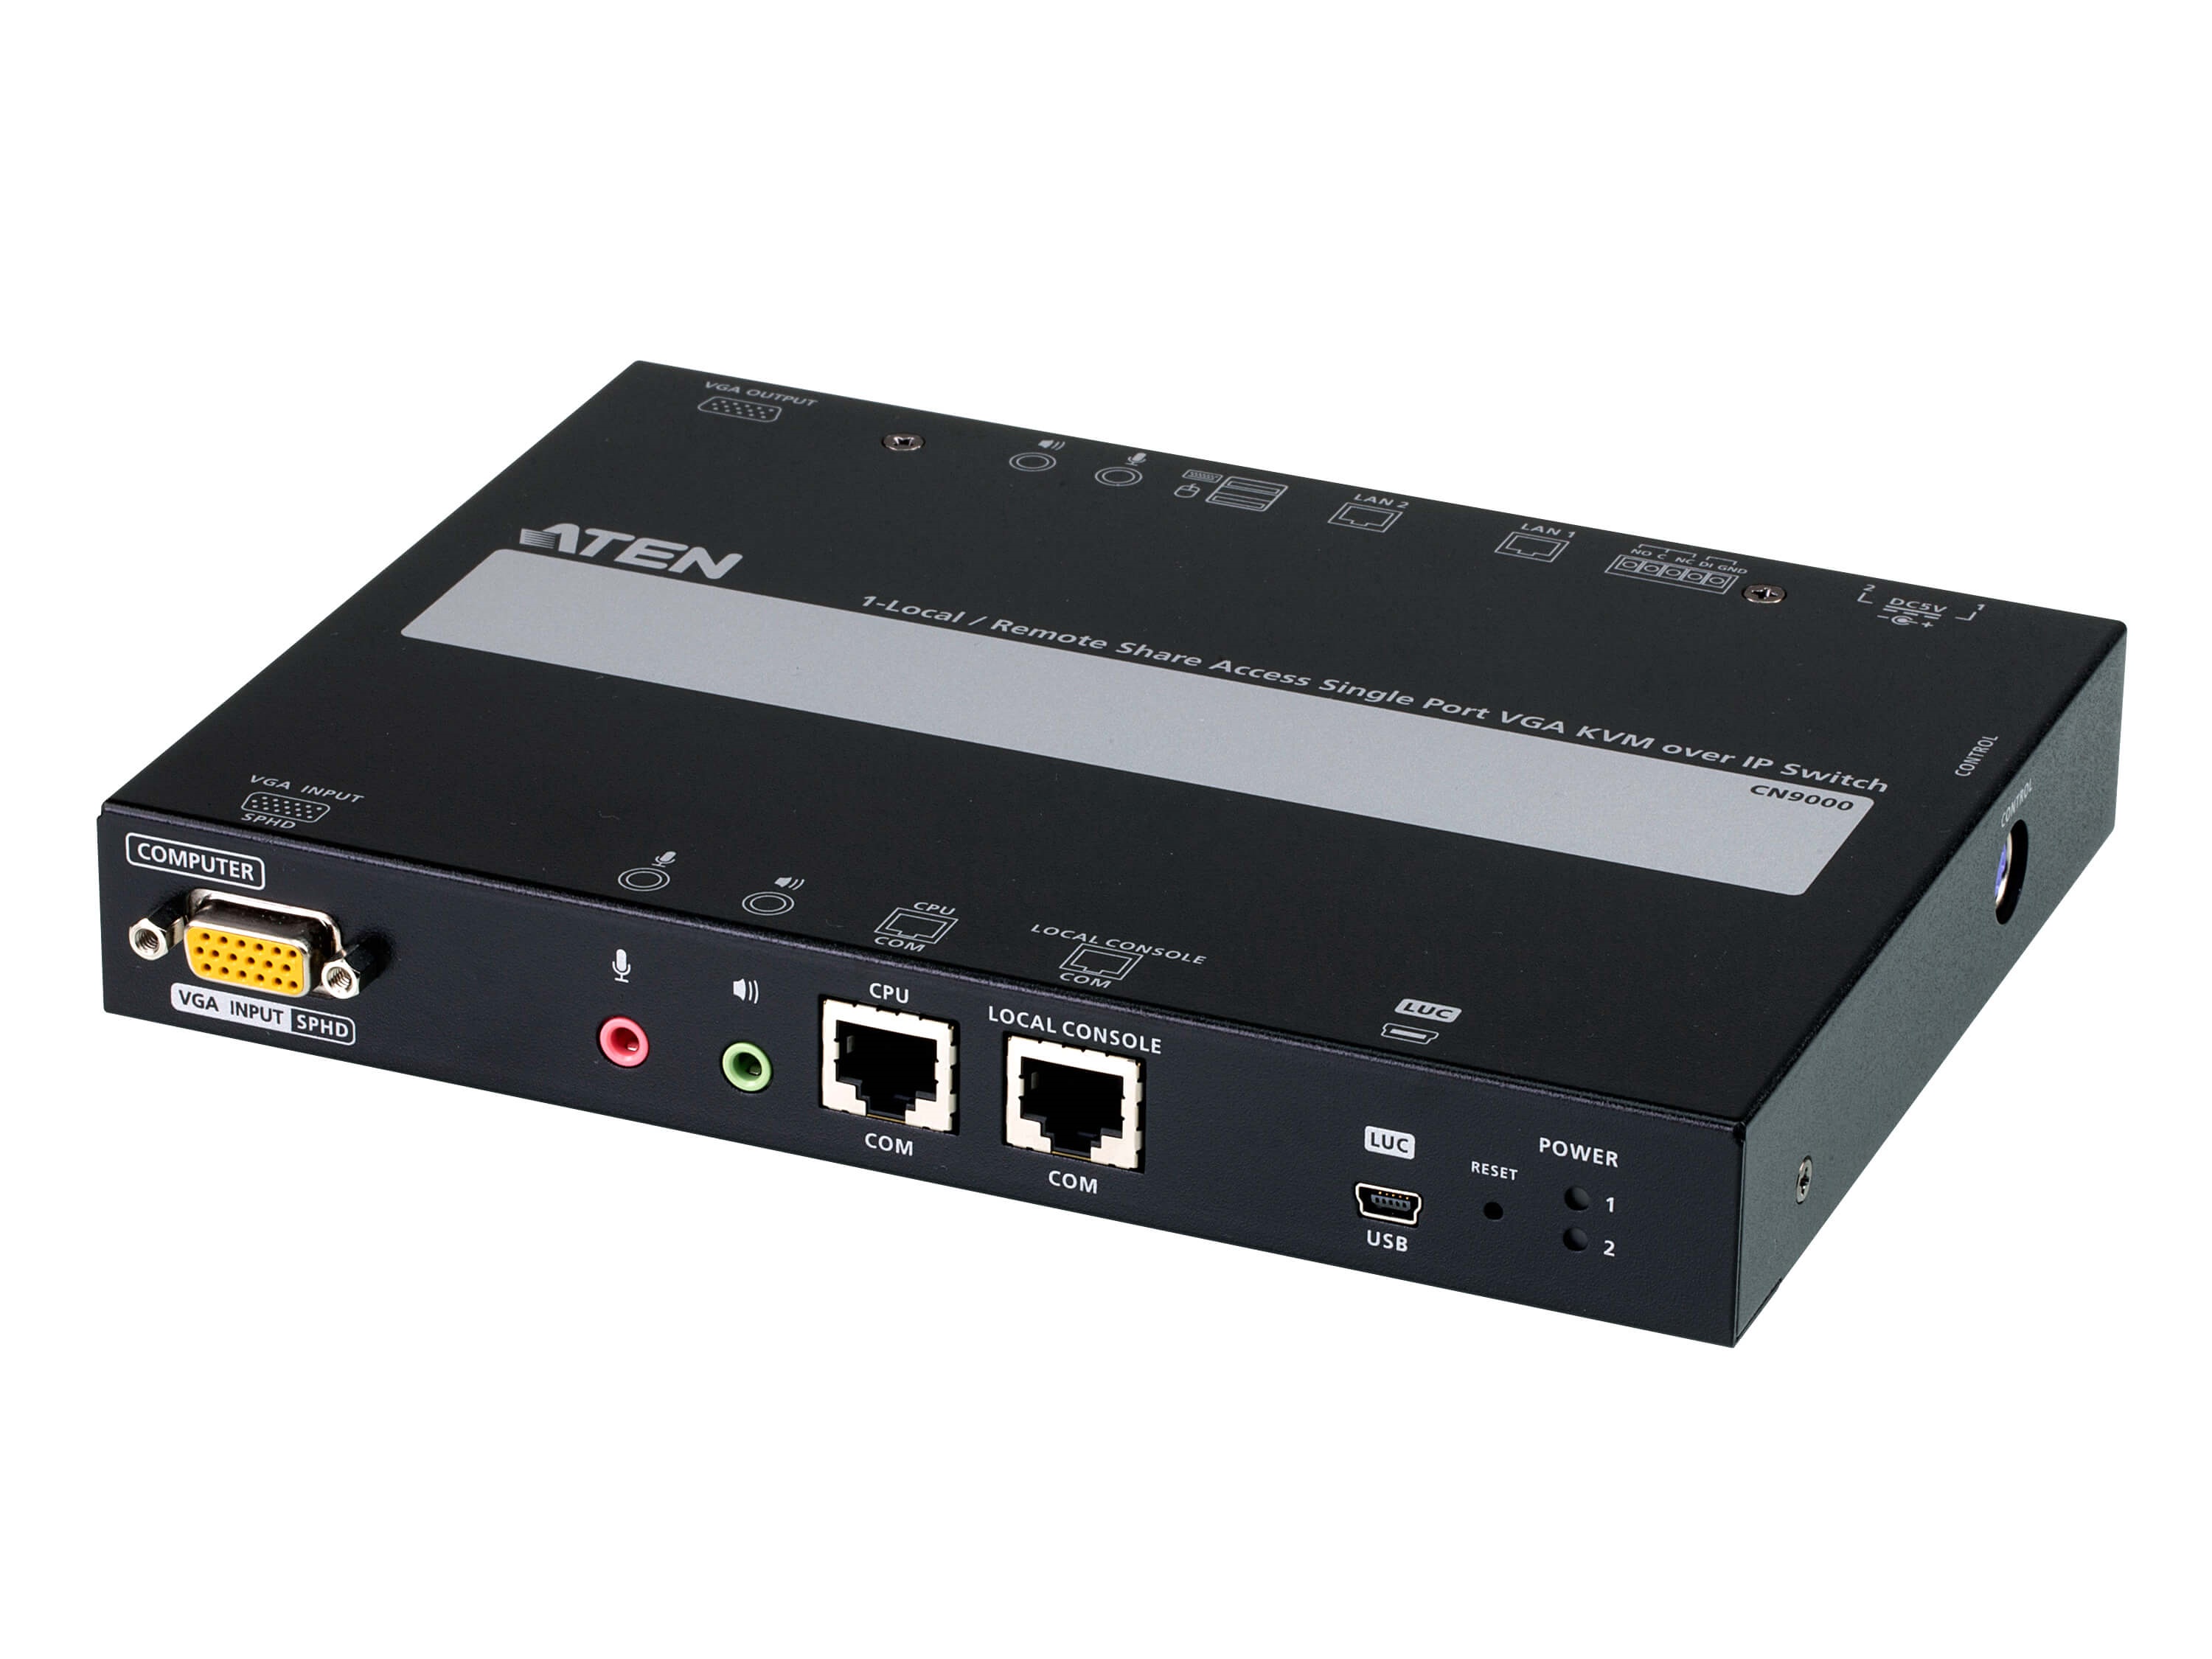 CN9000 1-Local/Remote Share Access Single Port VGA KVM over IP Switch by Aten